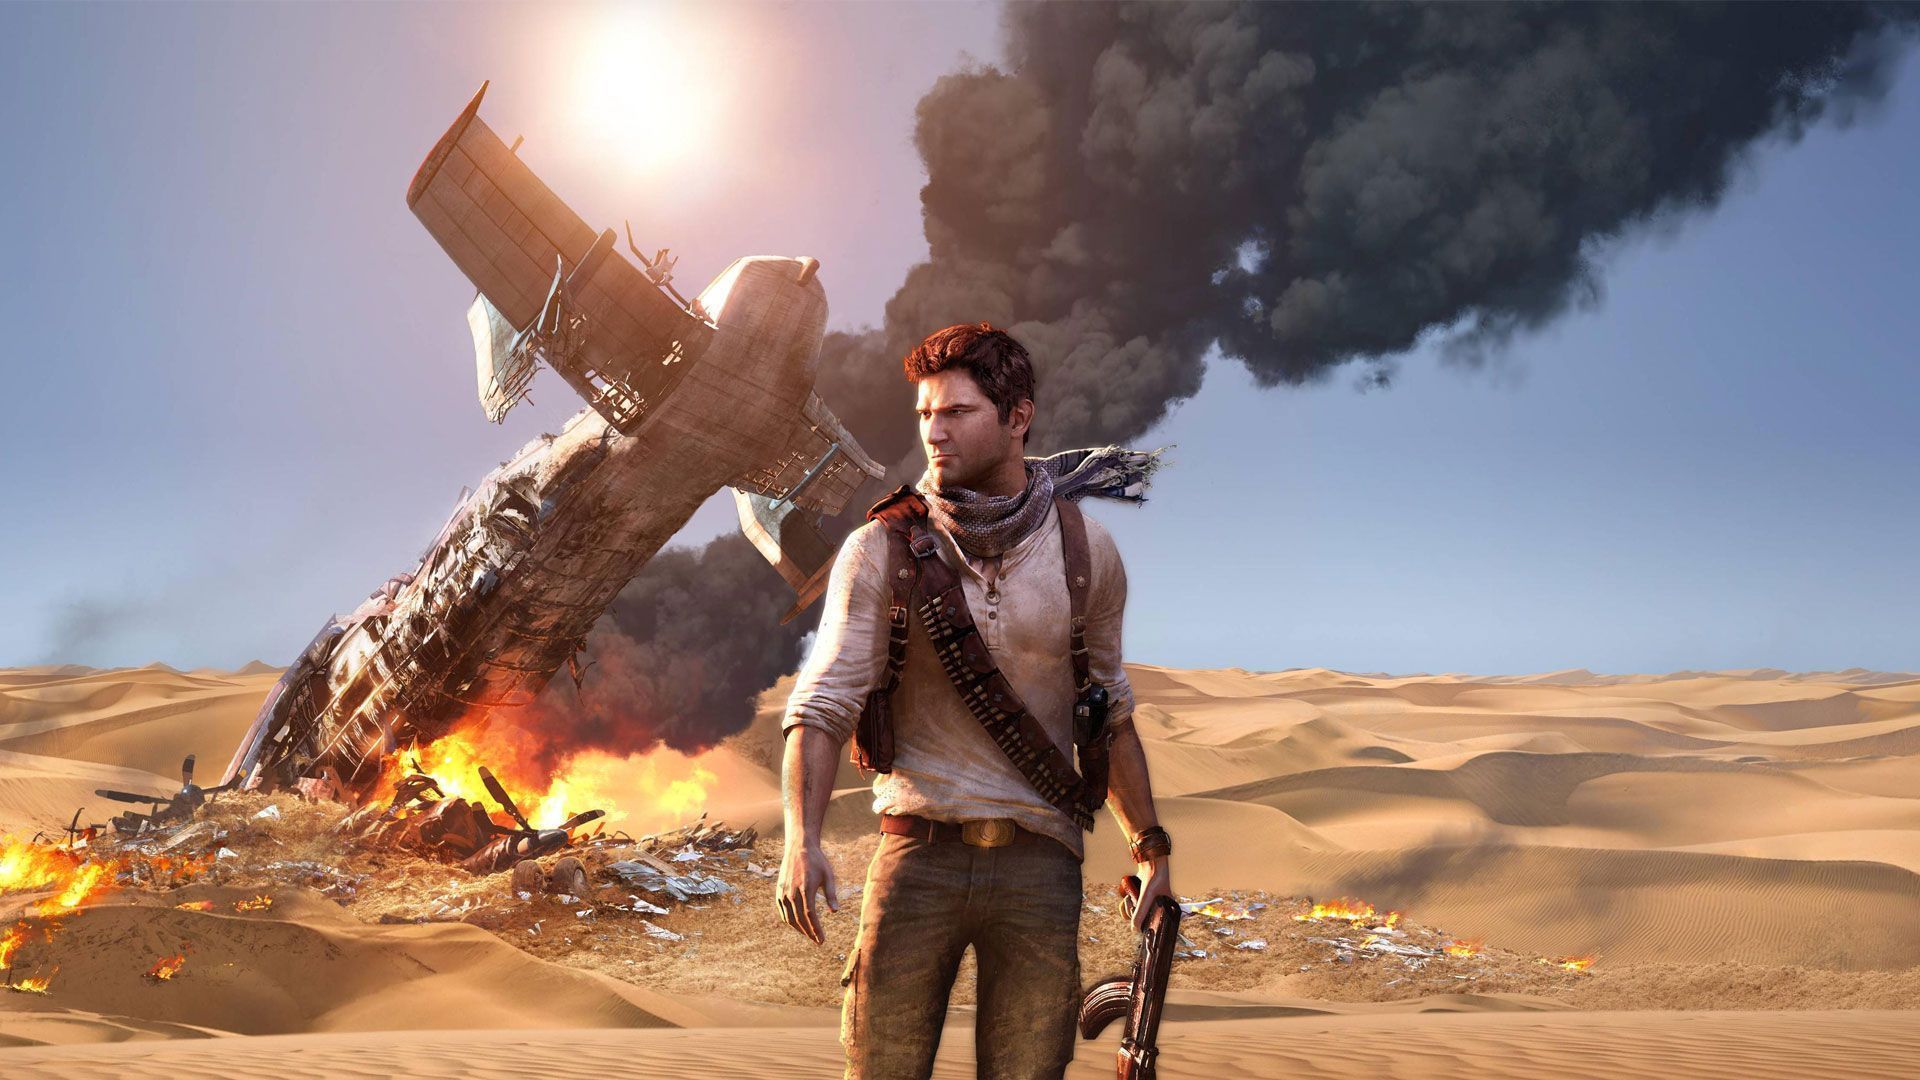 Uncharted 3 Drakes Deception Wallpapers in HD